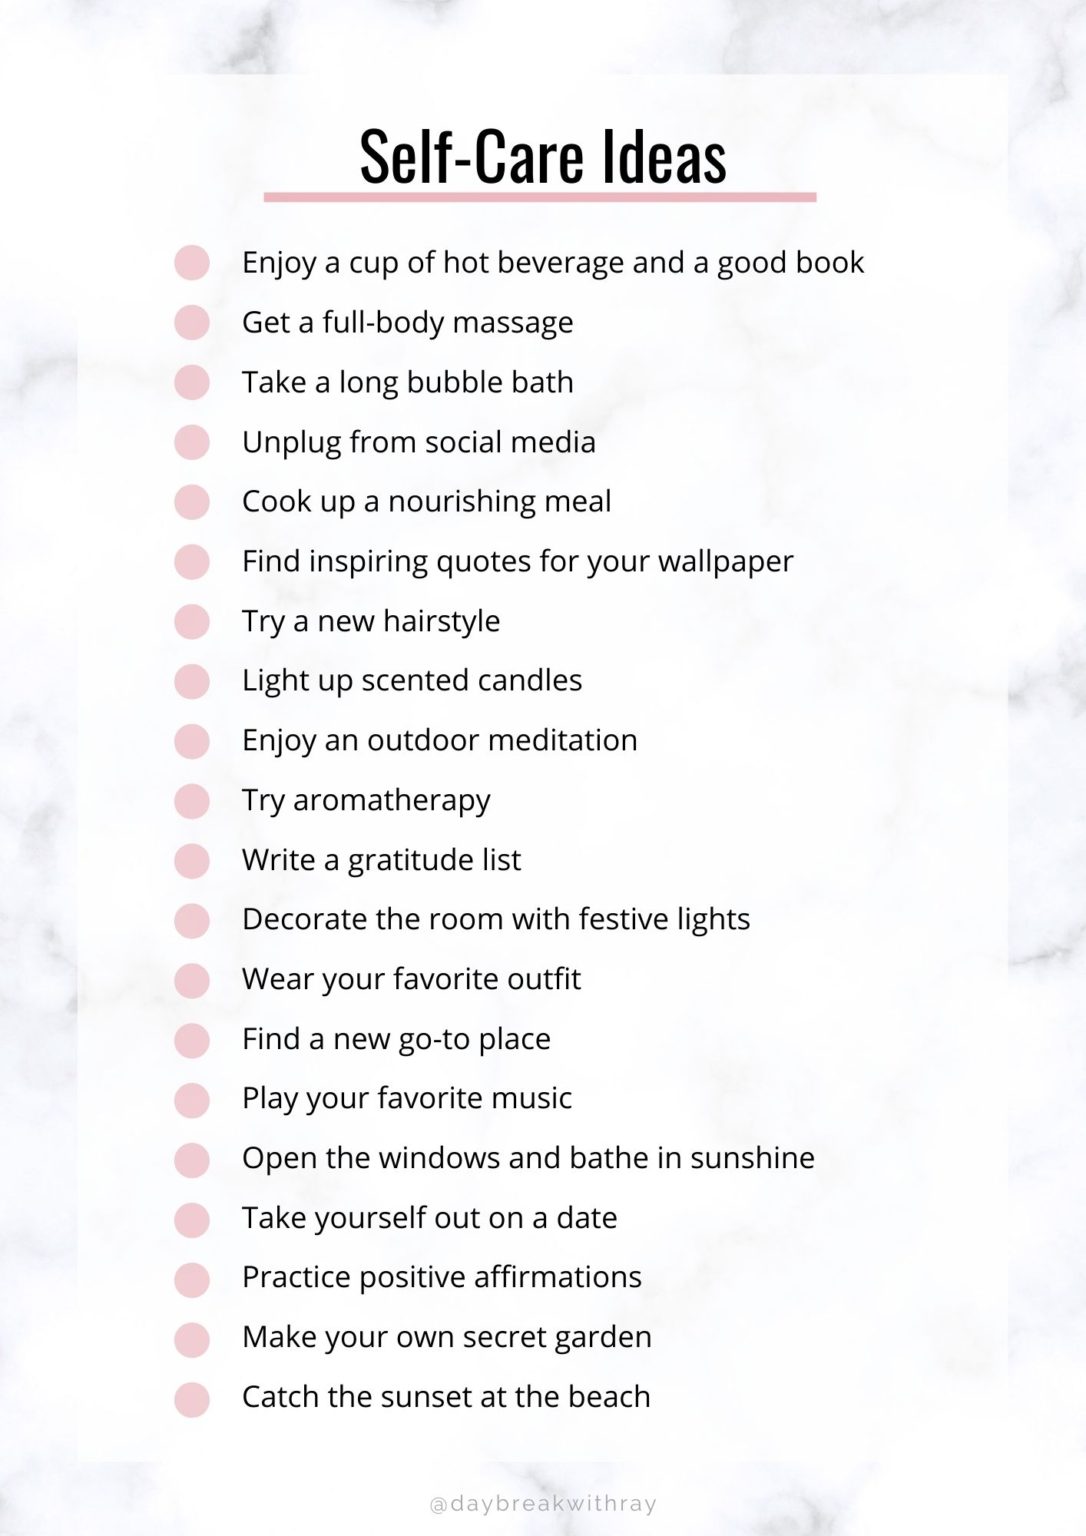 The Ultimate List of Self-Care Ideas is here! (UPDATED)